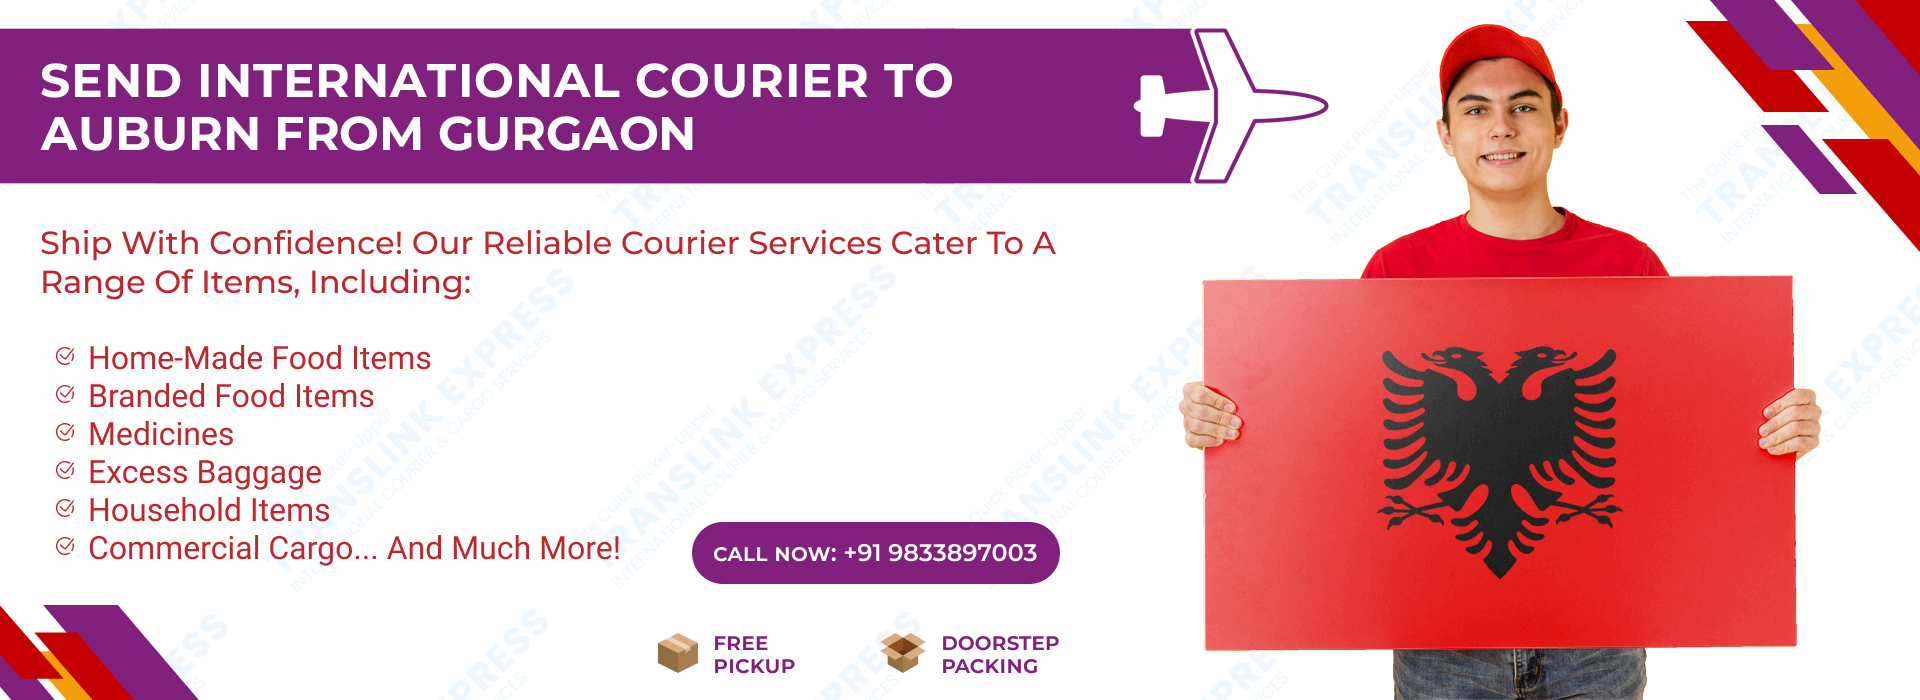 Courier to Auburn From Gurgaon